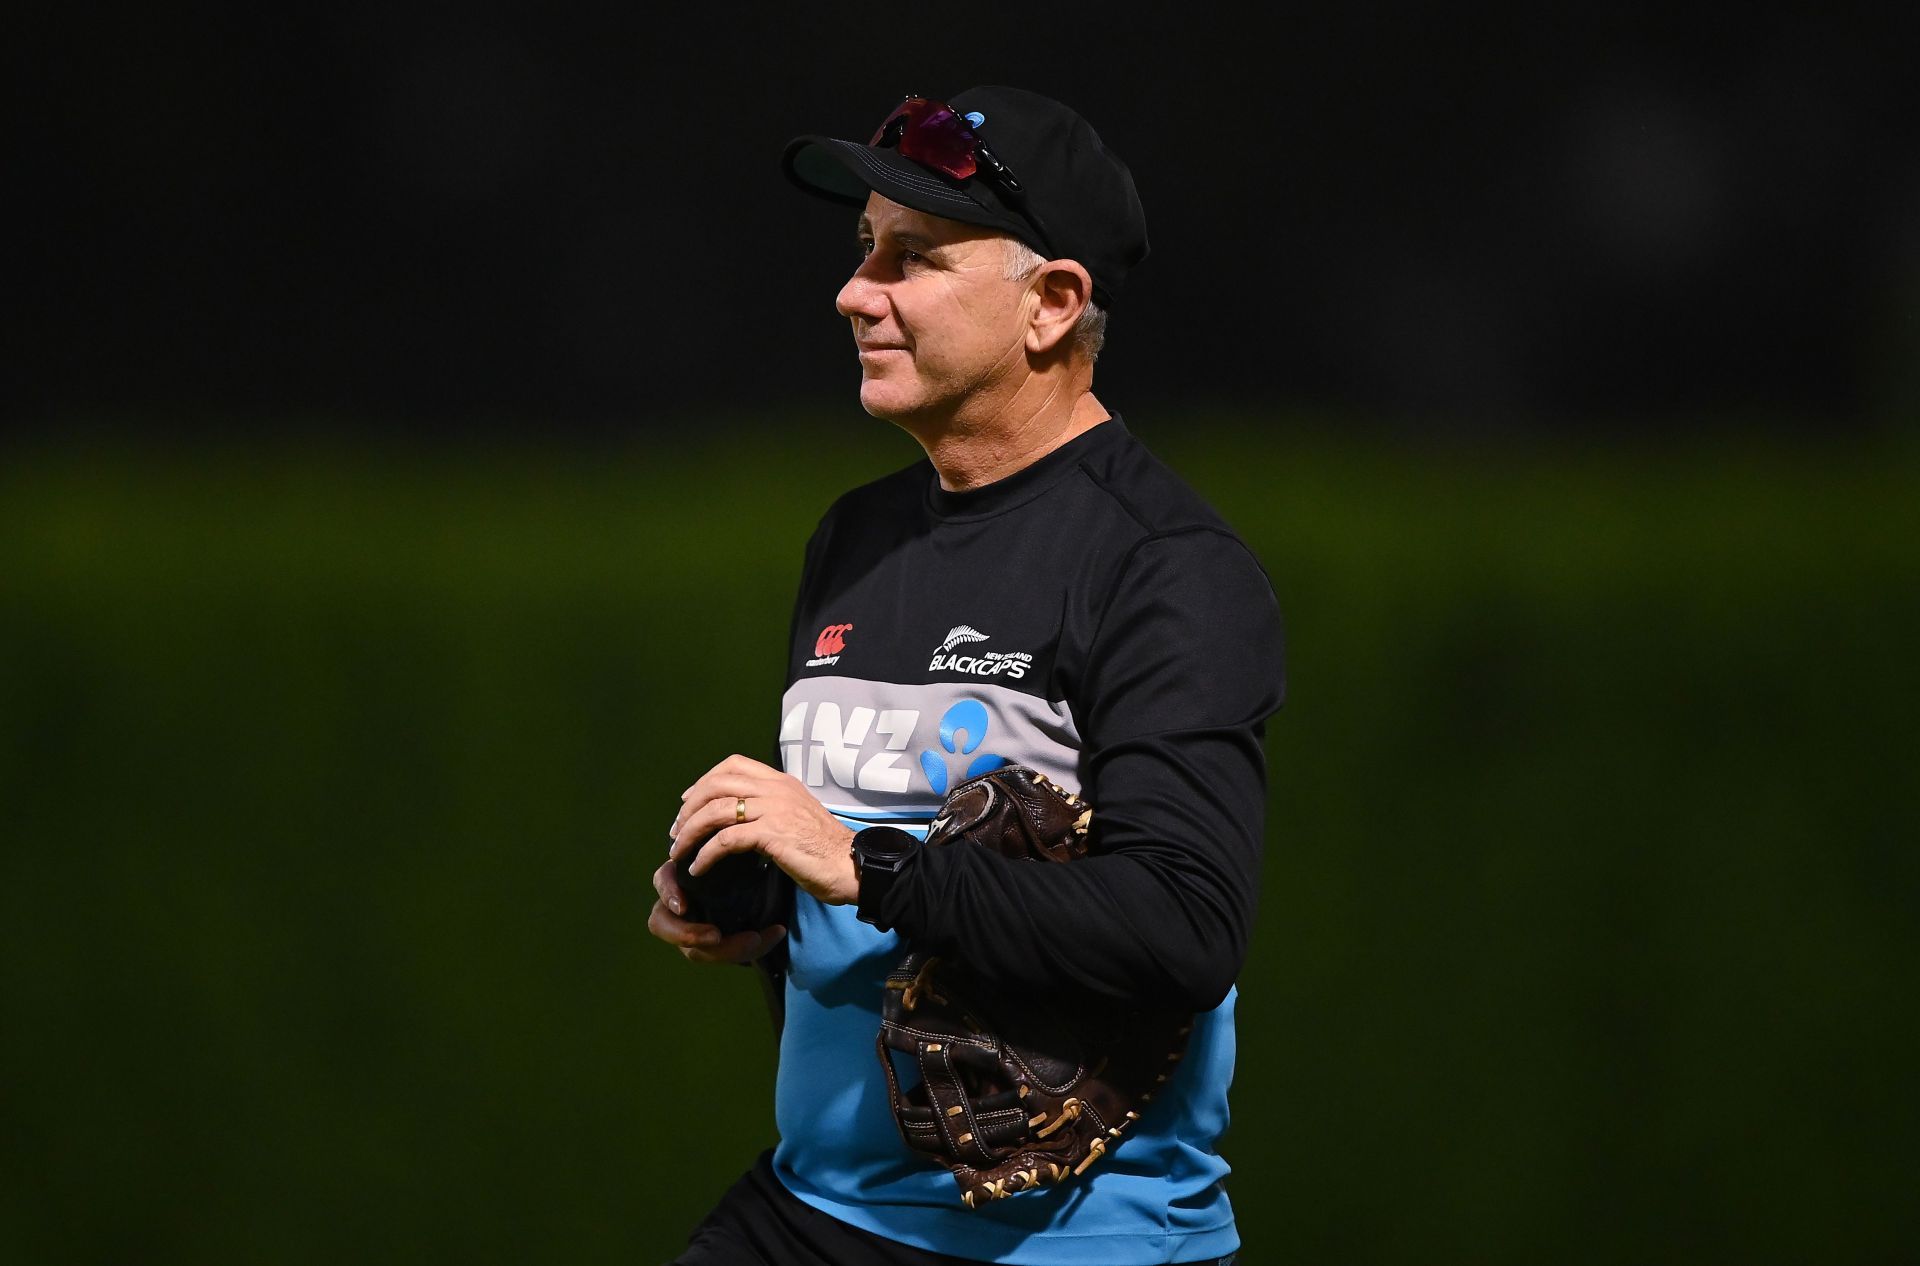 Gary Stead thinks the India tour will be mentally challenging for the NZ cricketers. (Credit: Getty Images)